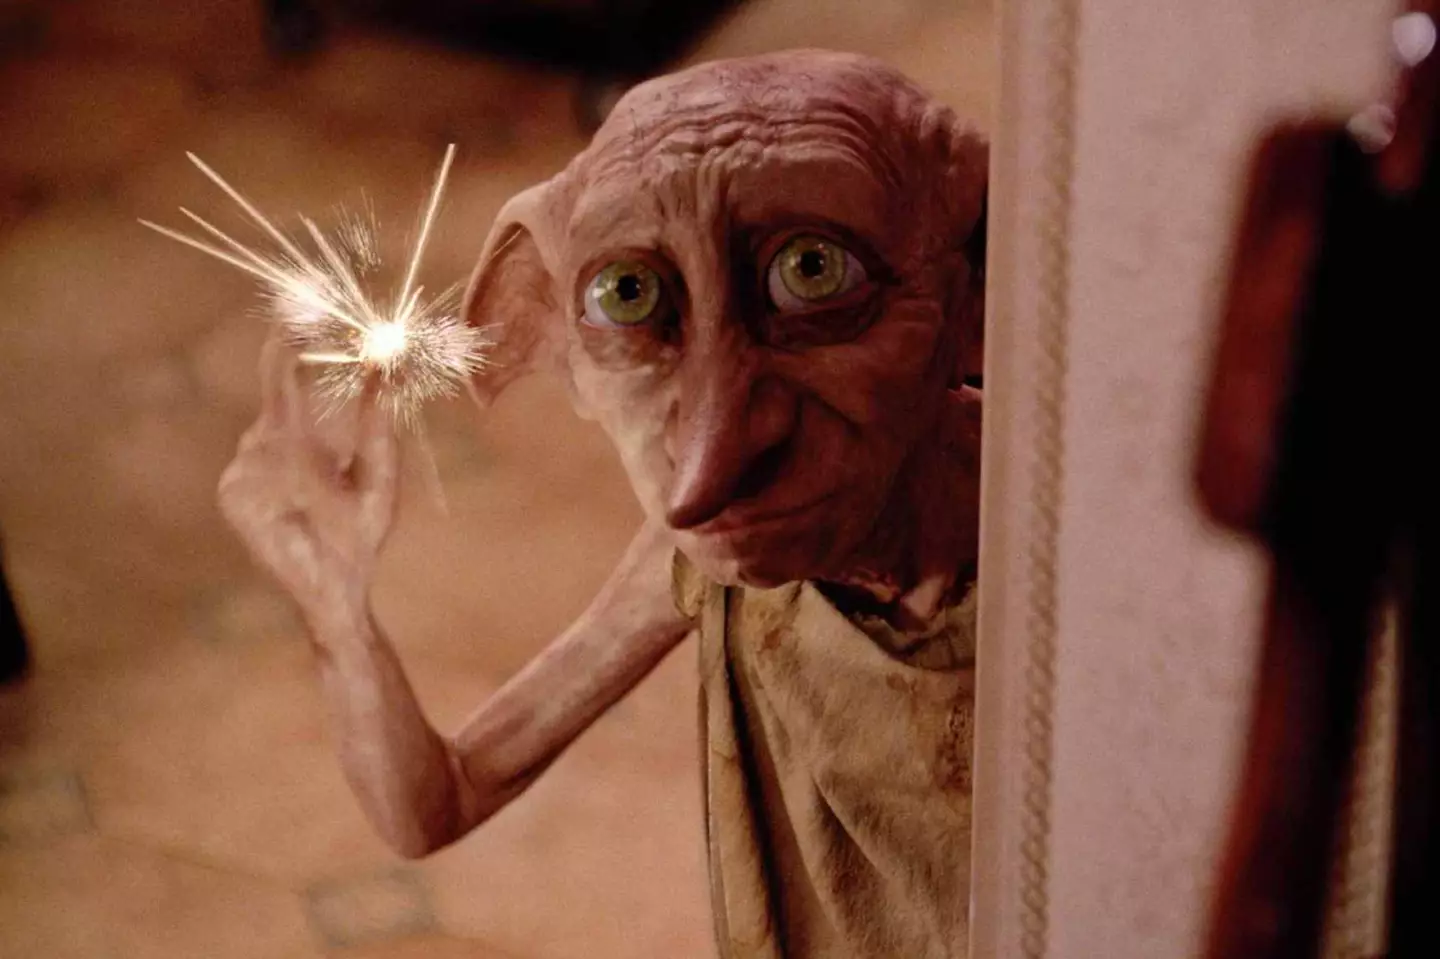 Dobby was set free in the Chamber of Secrets.